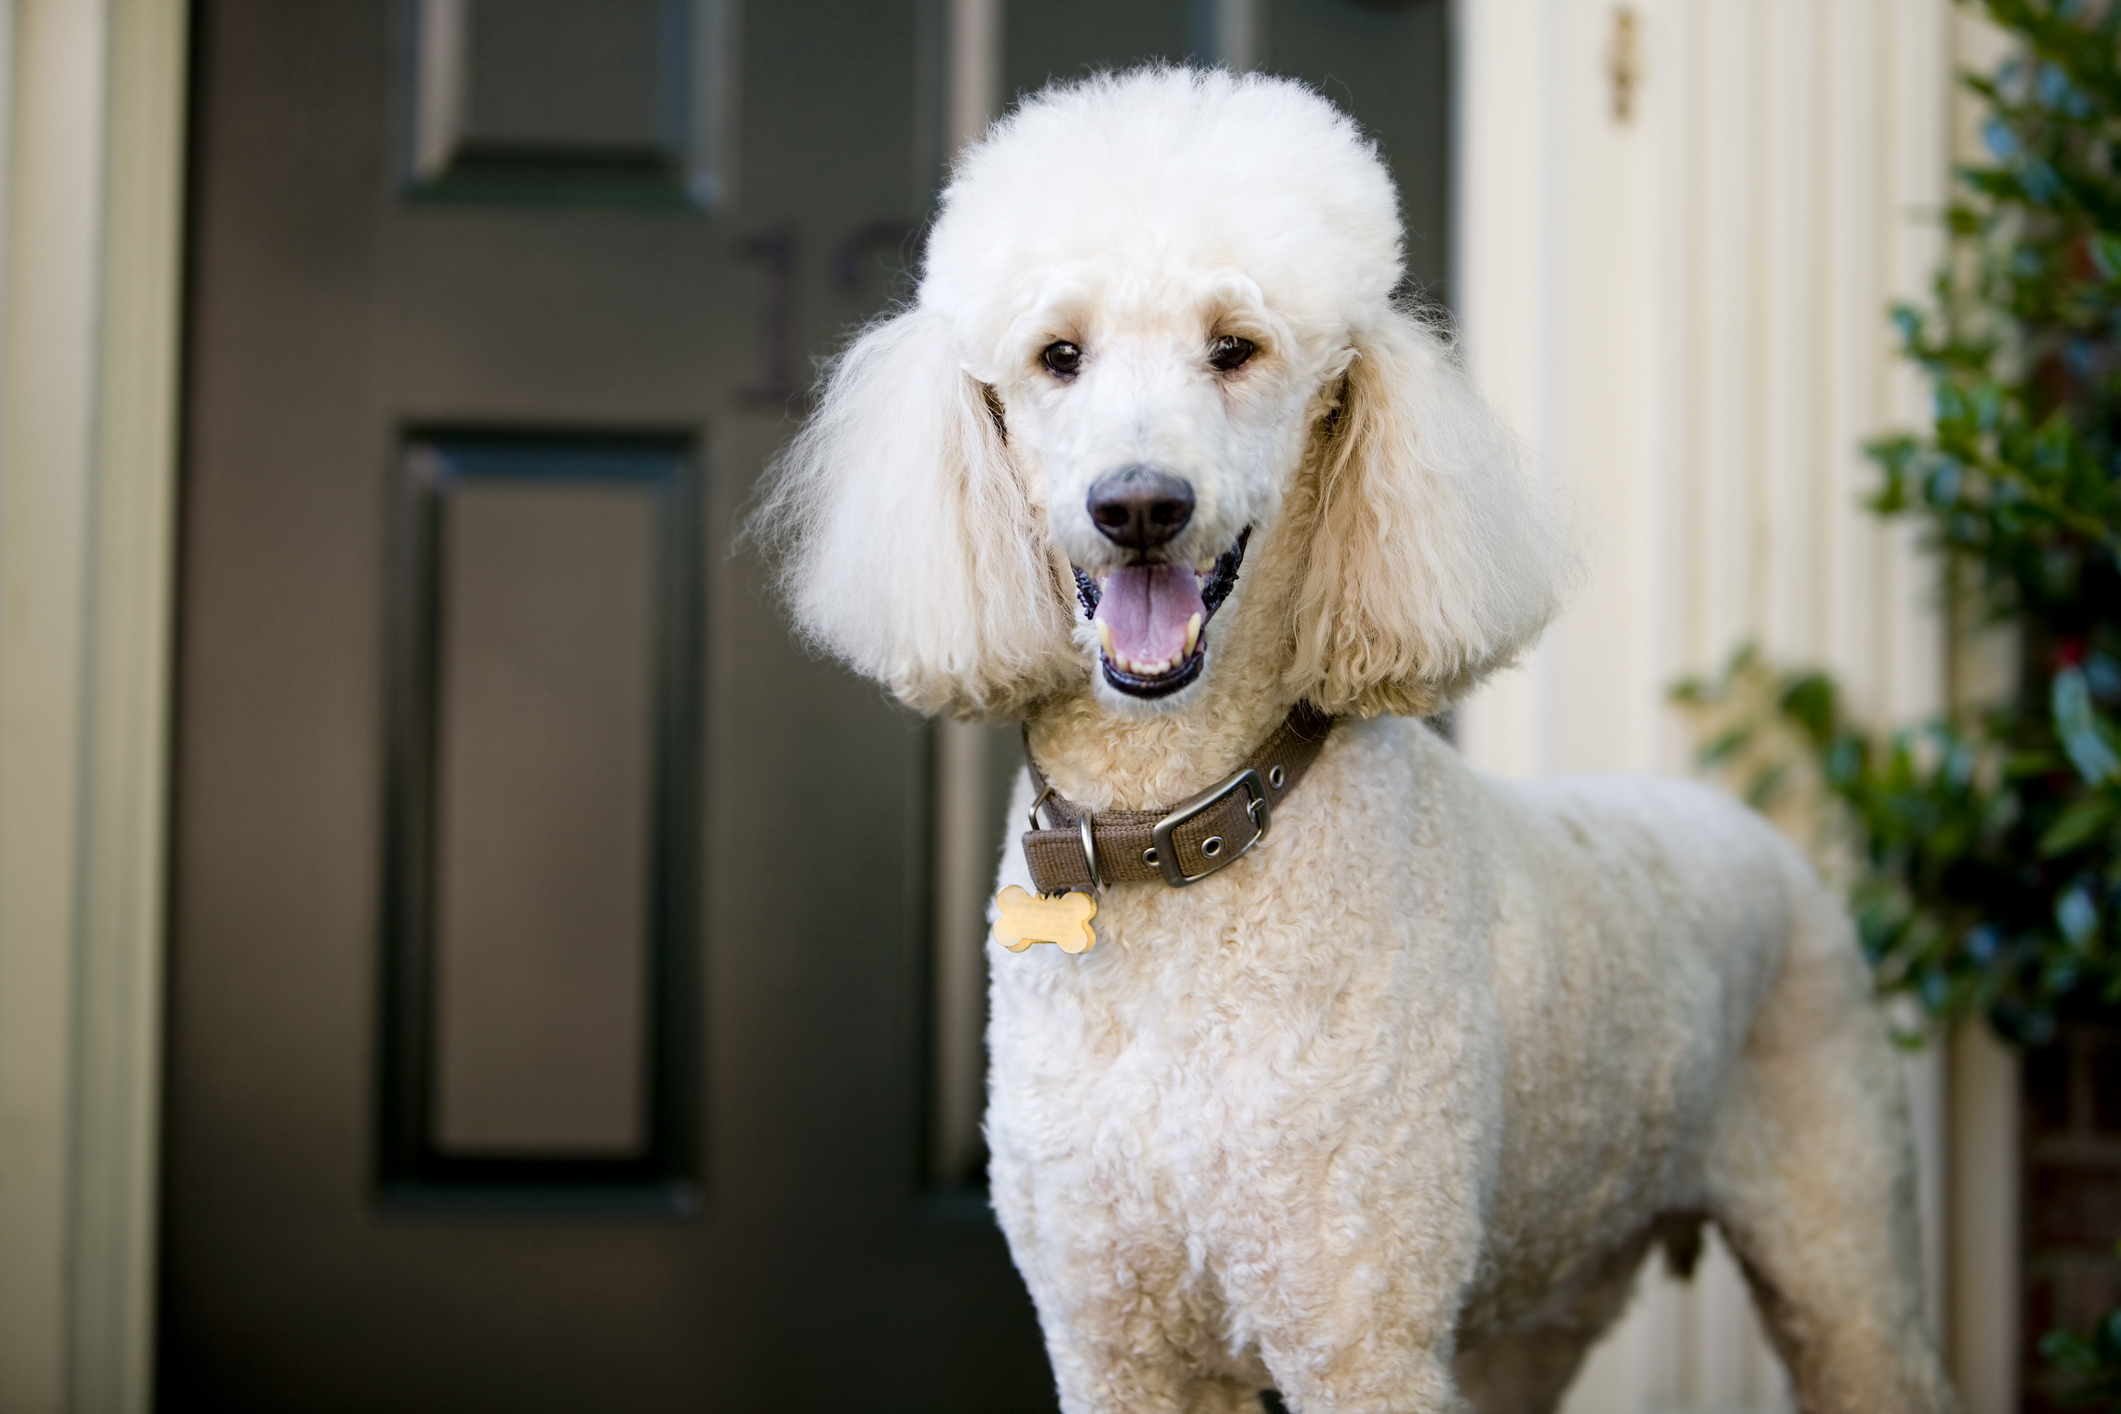  Smiling white Standard Poodle standing in front of a door